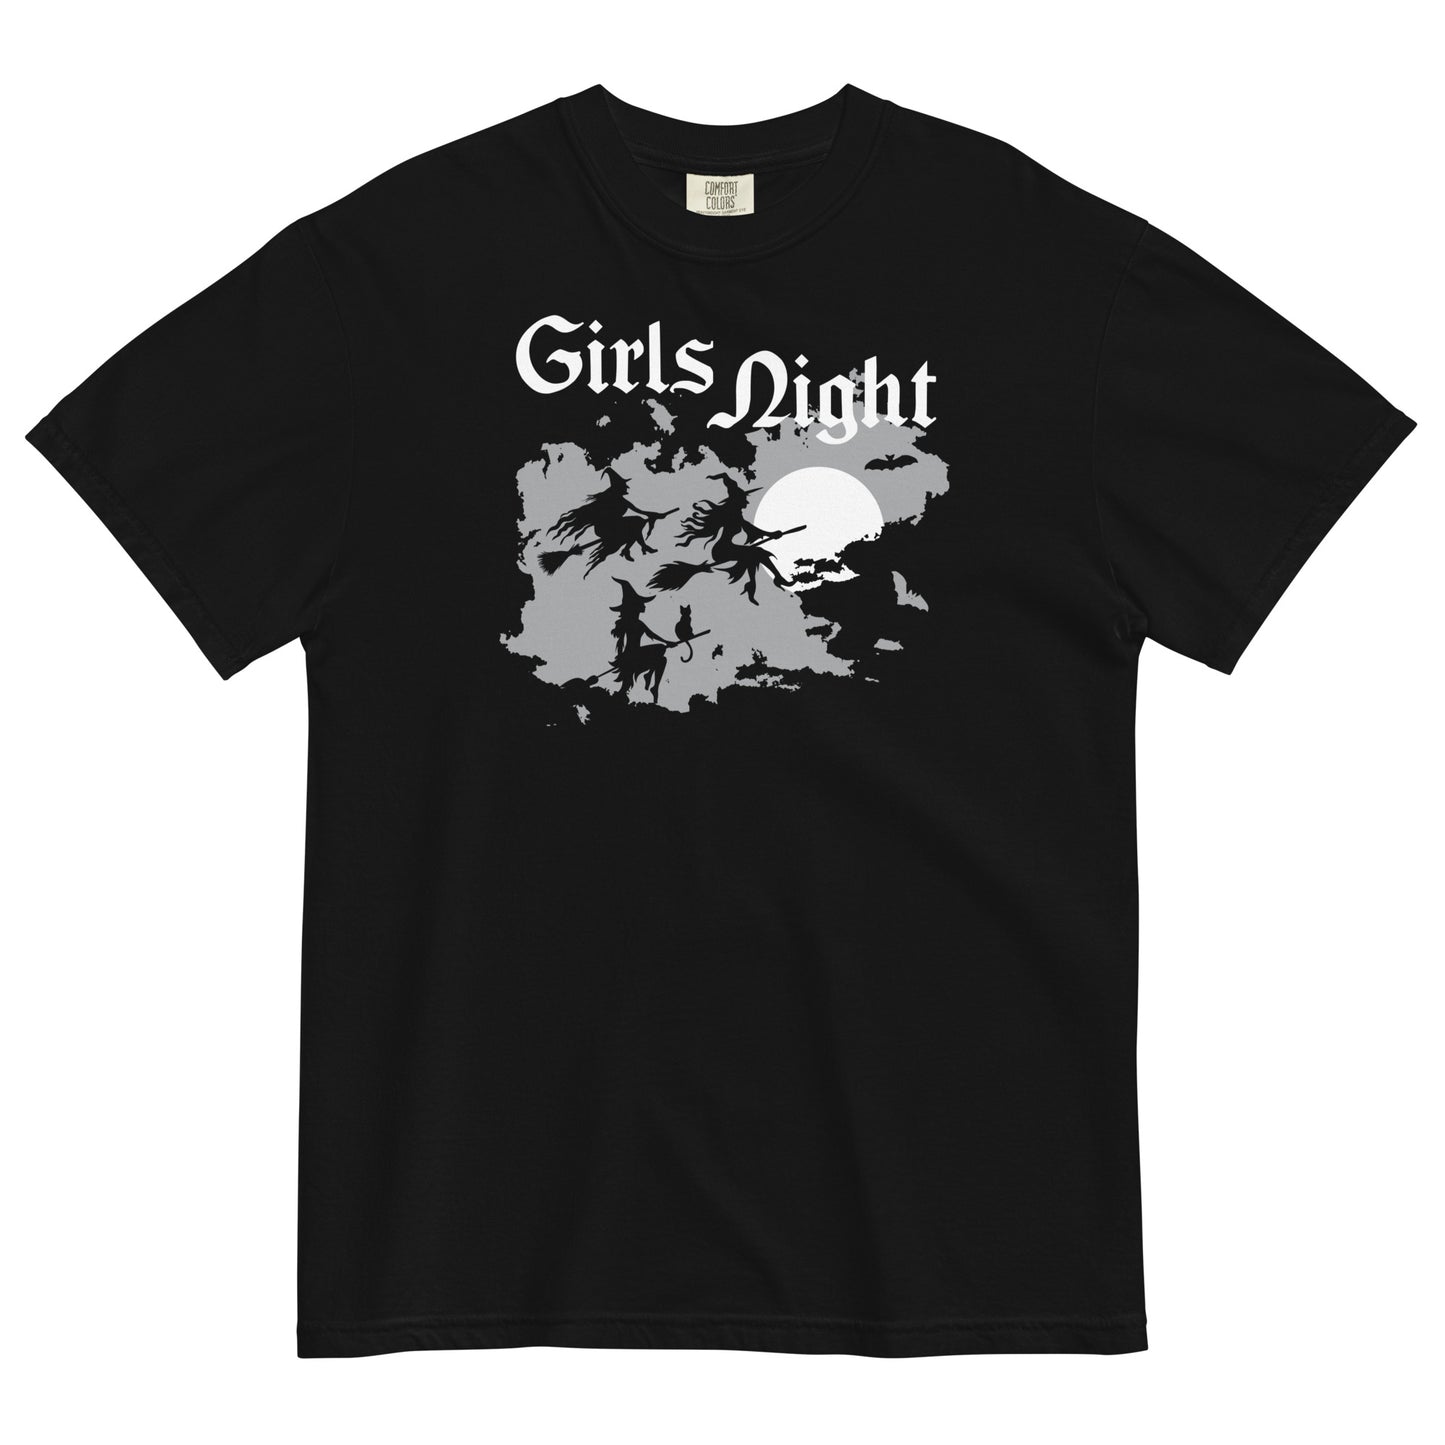 Girls Night Men's Relaxed Fit Tee